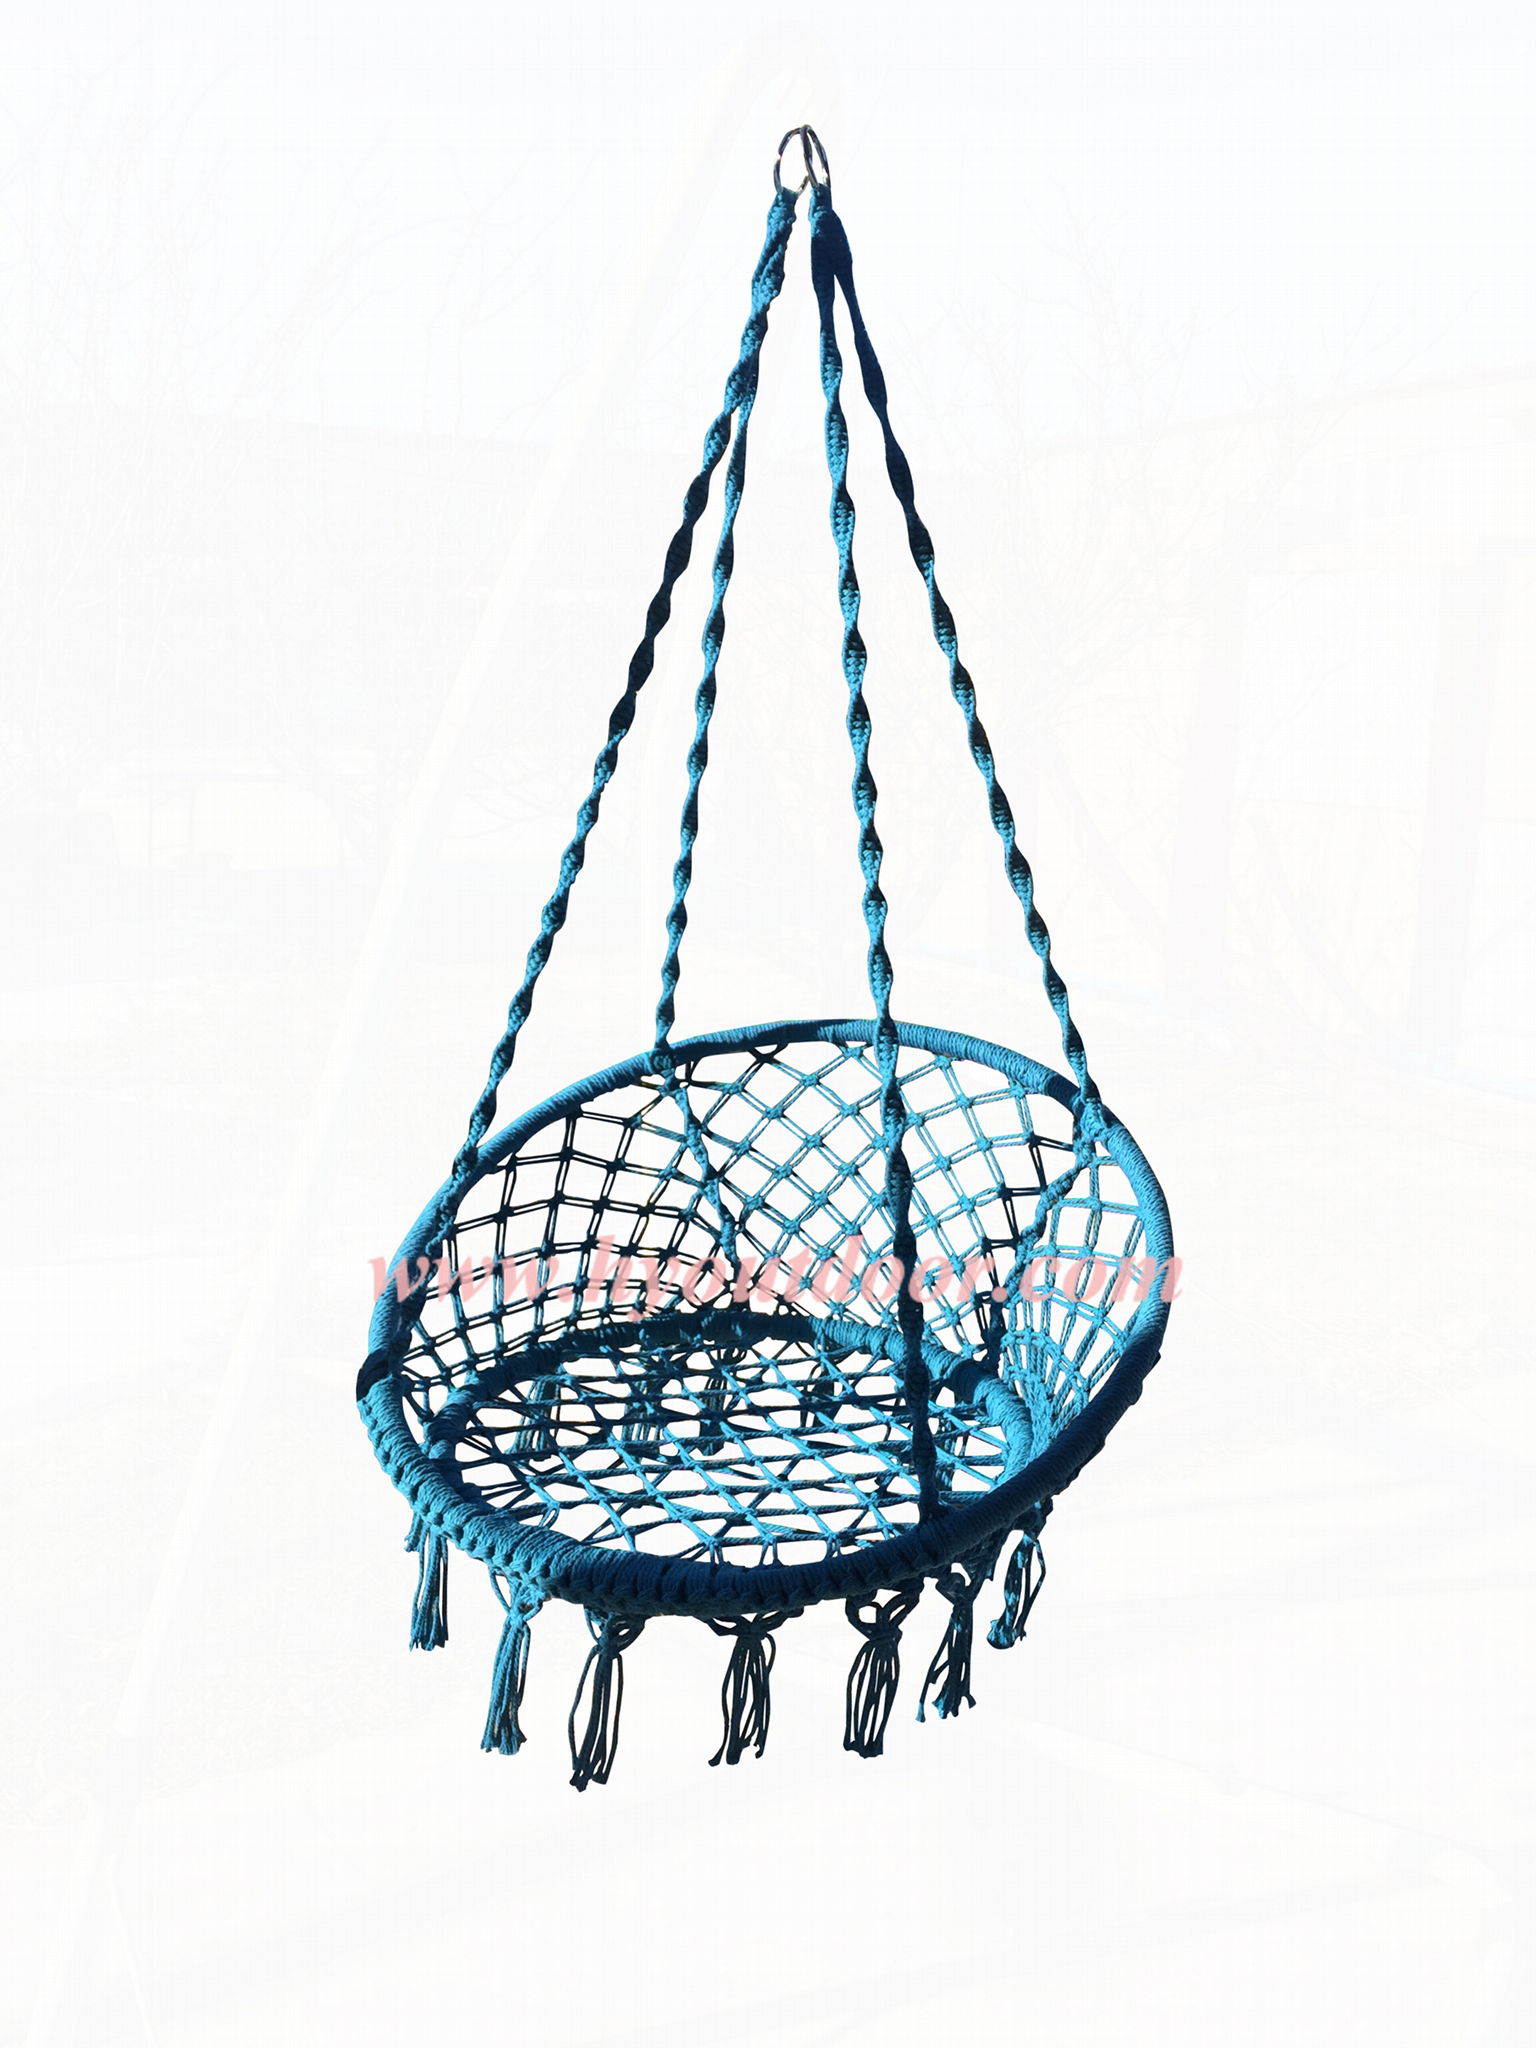 Hanging chair 2